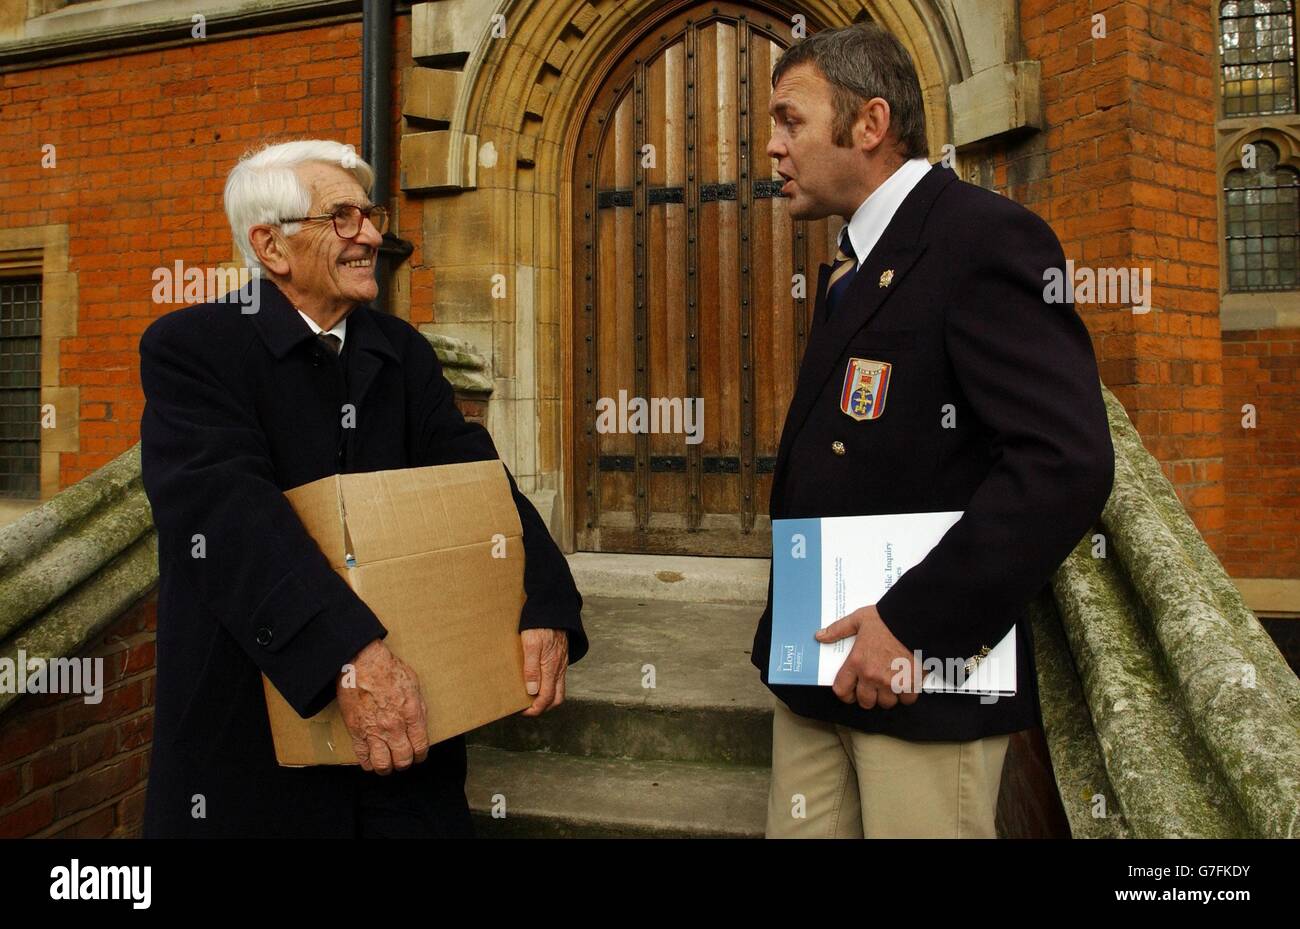 Lord Lloyd of Berwick (L) speaks with Gulf War veteran Noel Baker, 38, from Medway, Kent, formerly with the 16/5th Lancers Armoured Reconaissance Unit , after Lord Lloyd presented his report on 'Gulf War Syndrome'. Stock Photo